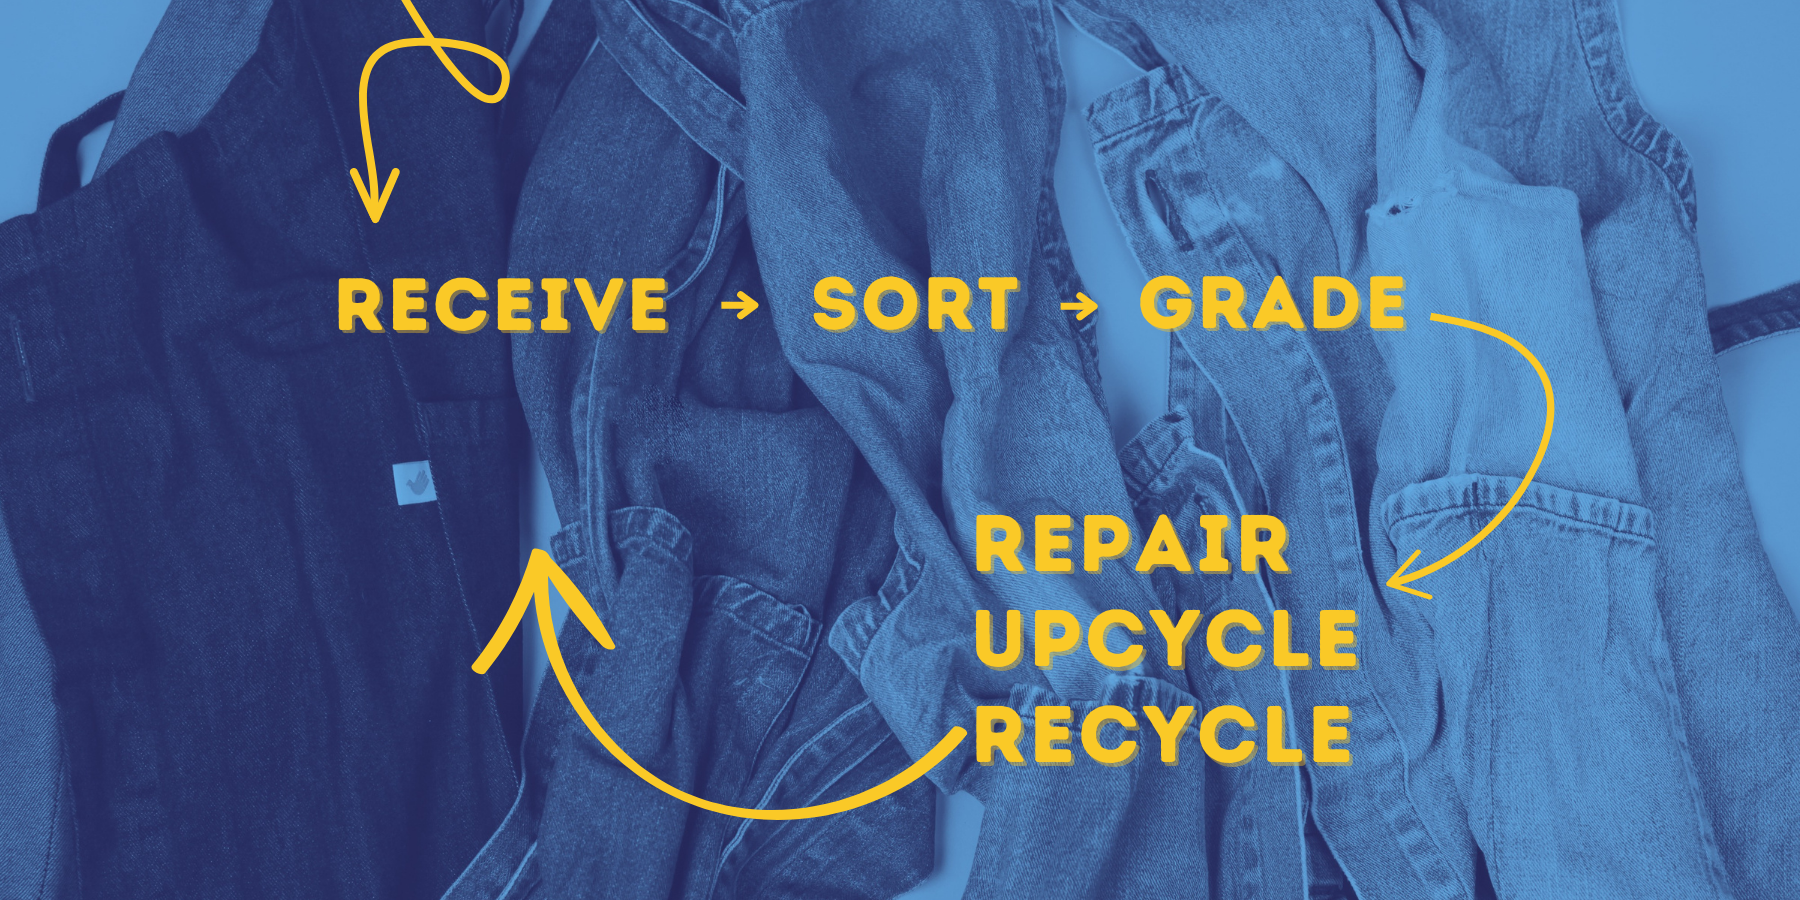 the recycling process, receive, sort, grade, repair, upcycle, recycle, and then repeat the process